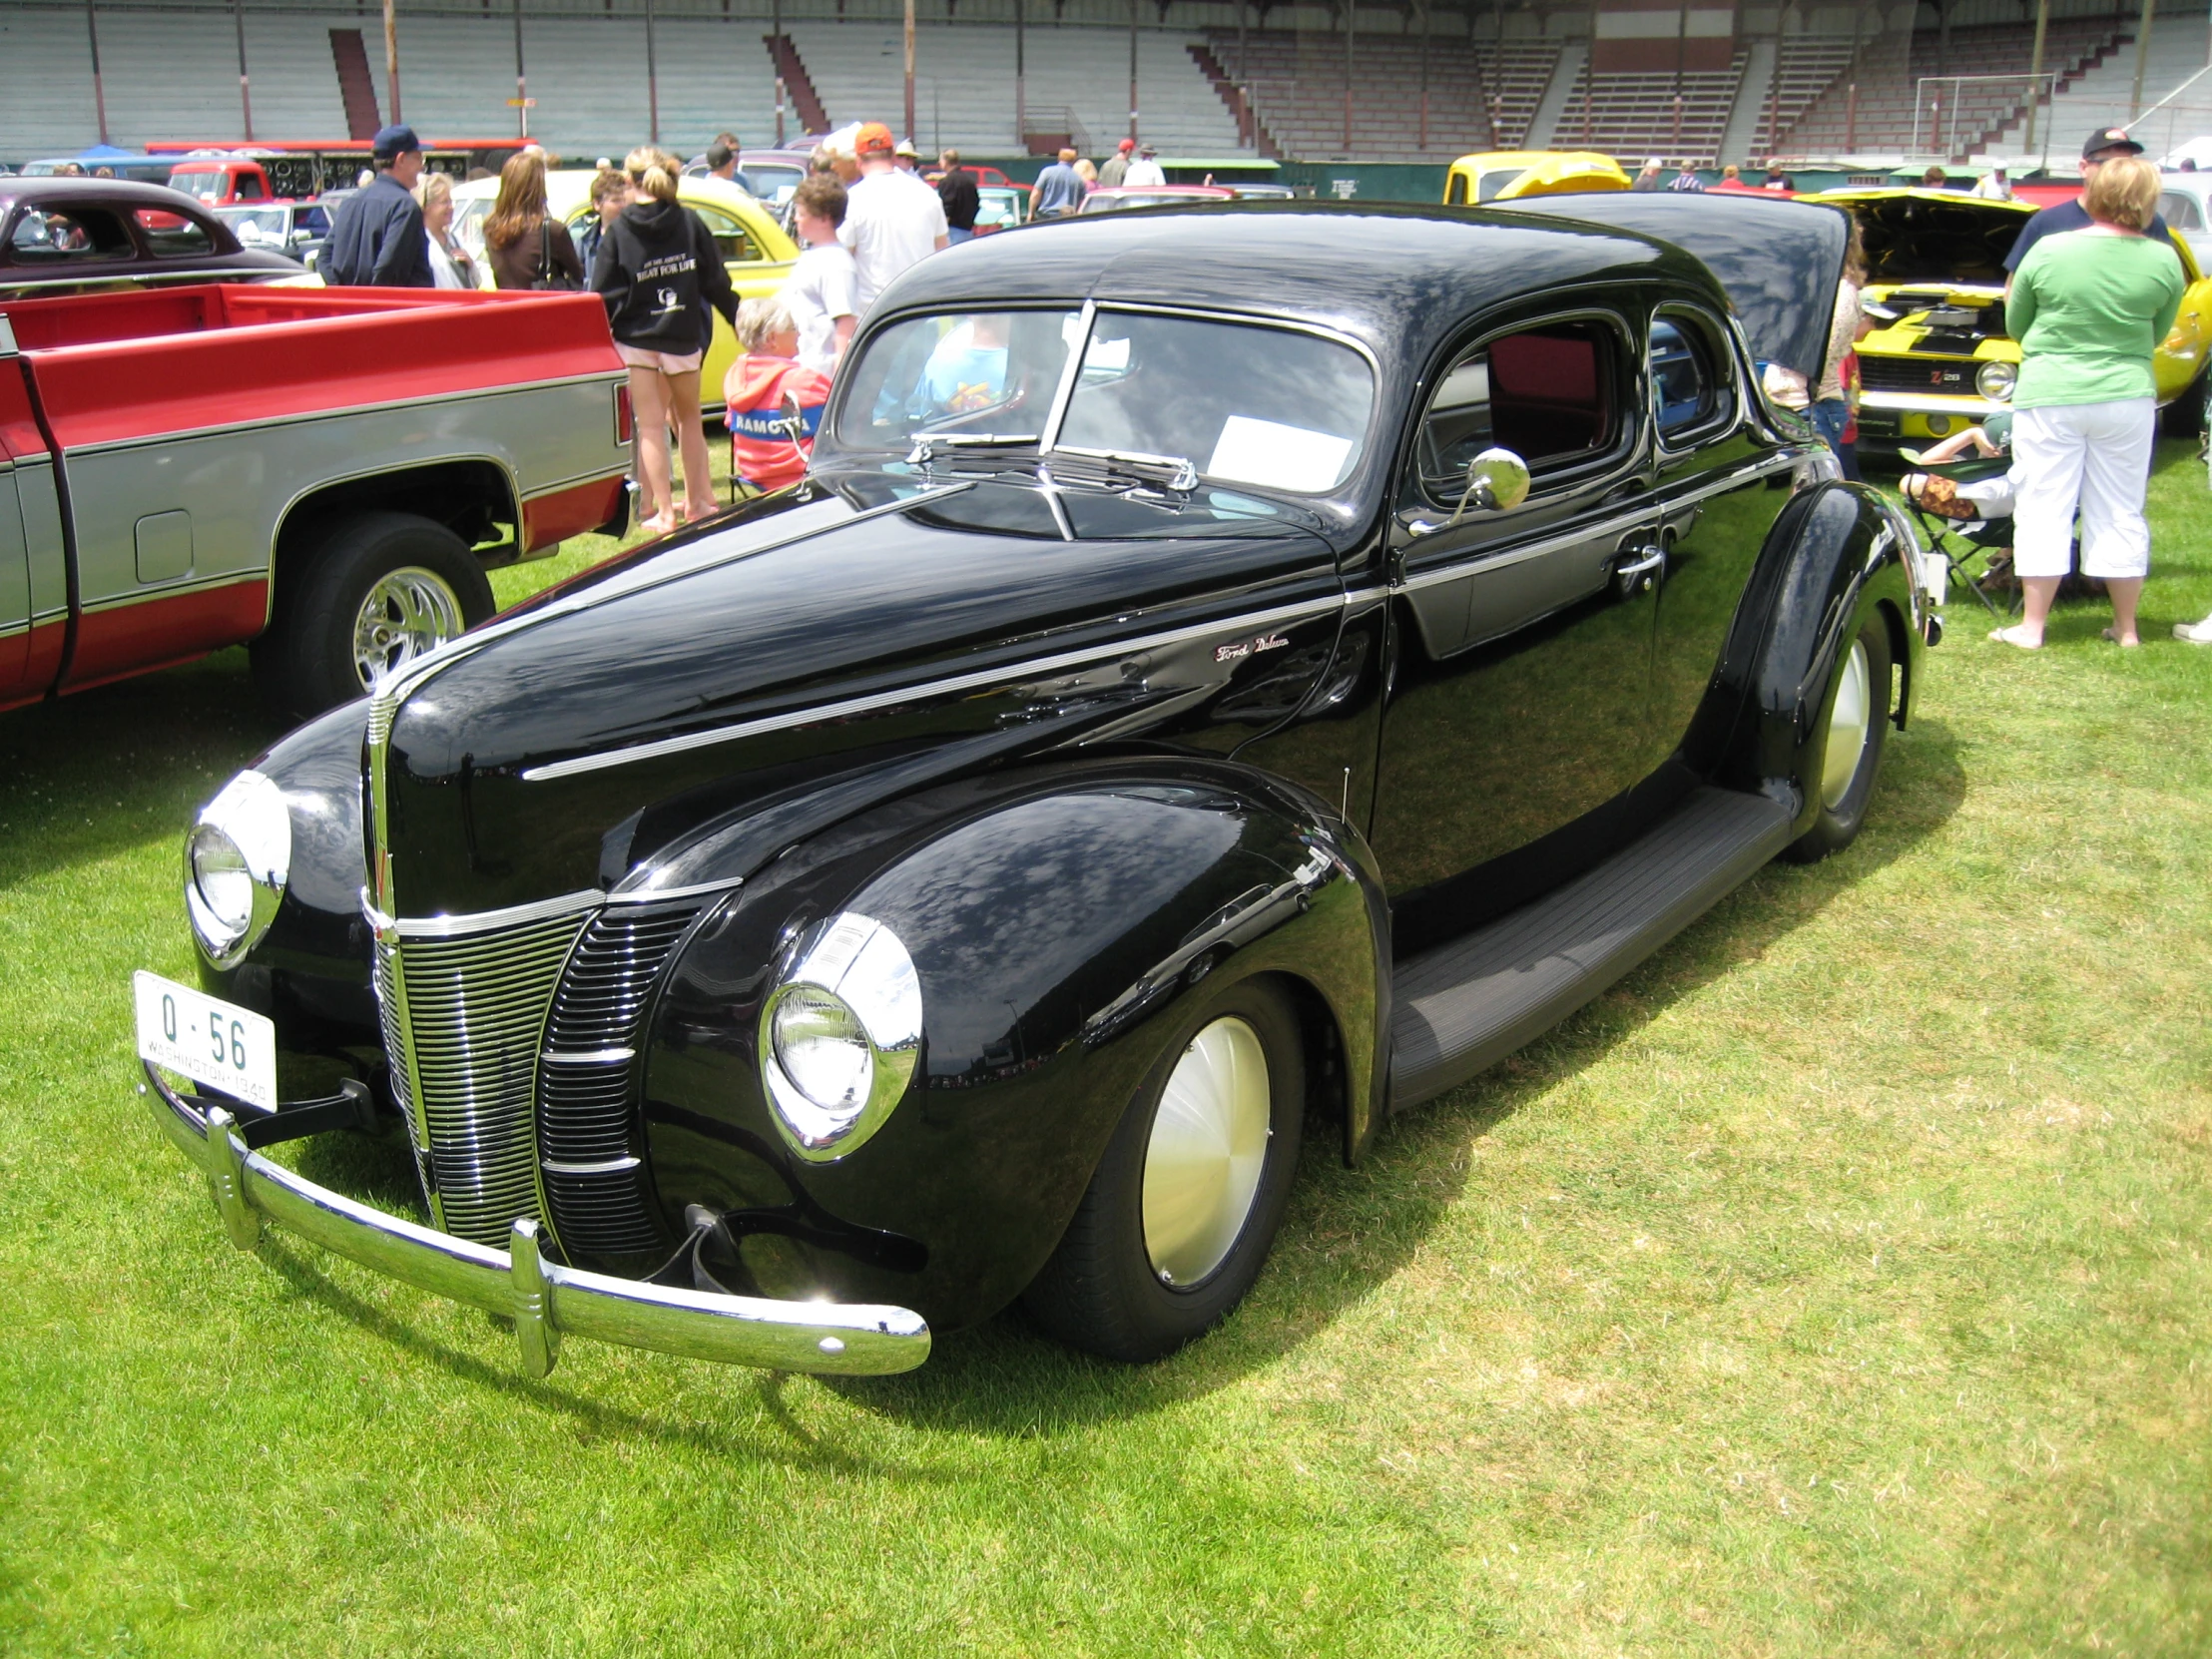 classic black car parked at a car show in grass